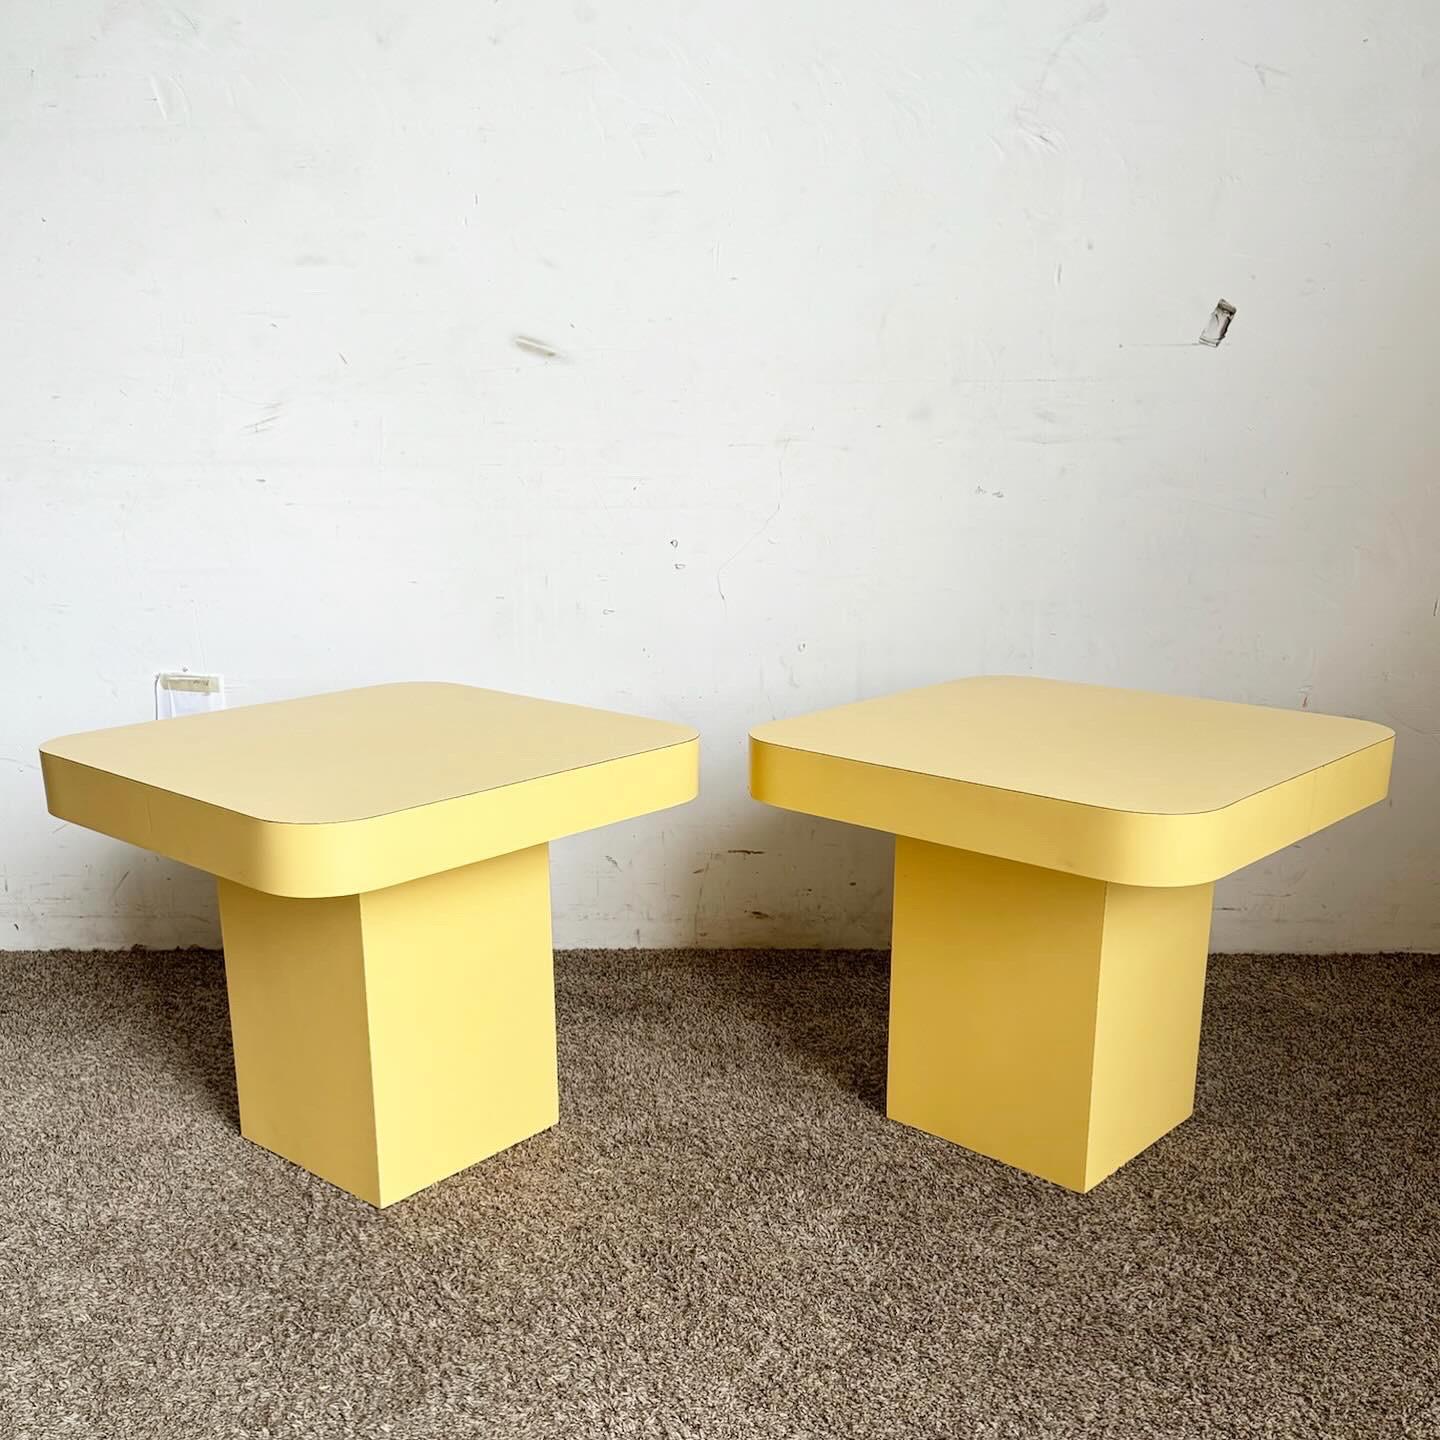 The Postmodern Yellow Laminate Mushroom Side Tables are a vibrant and playful addition to any interior. With a whimsical mushroom shape and bold yellow laminate finish, they capture the essence of postmodern design. These tables serve as functional